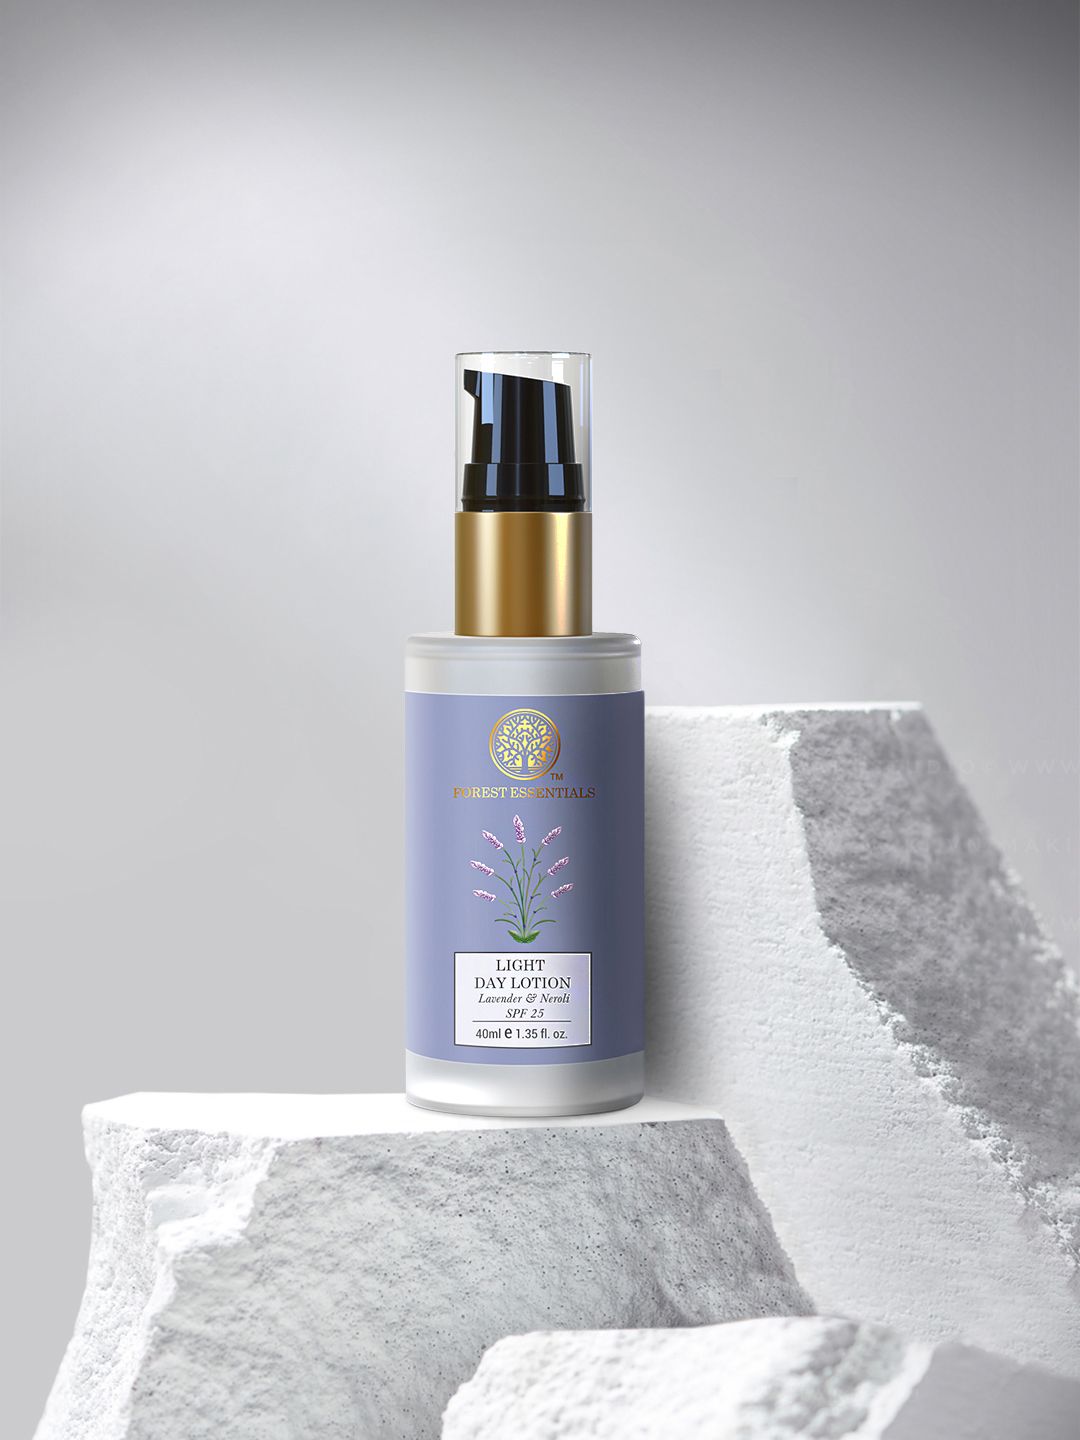 Forest Essentials Unisex Light Day face Lotion Lavender & Neroli SPF25 40ml Price in India